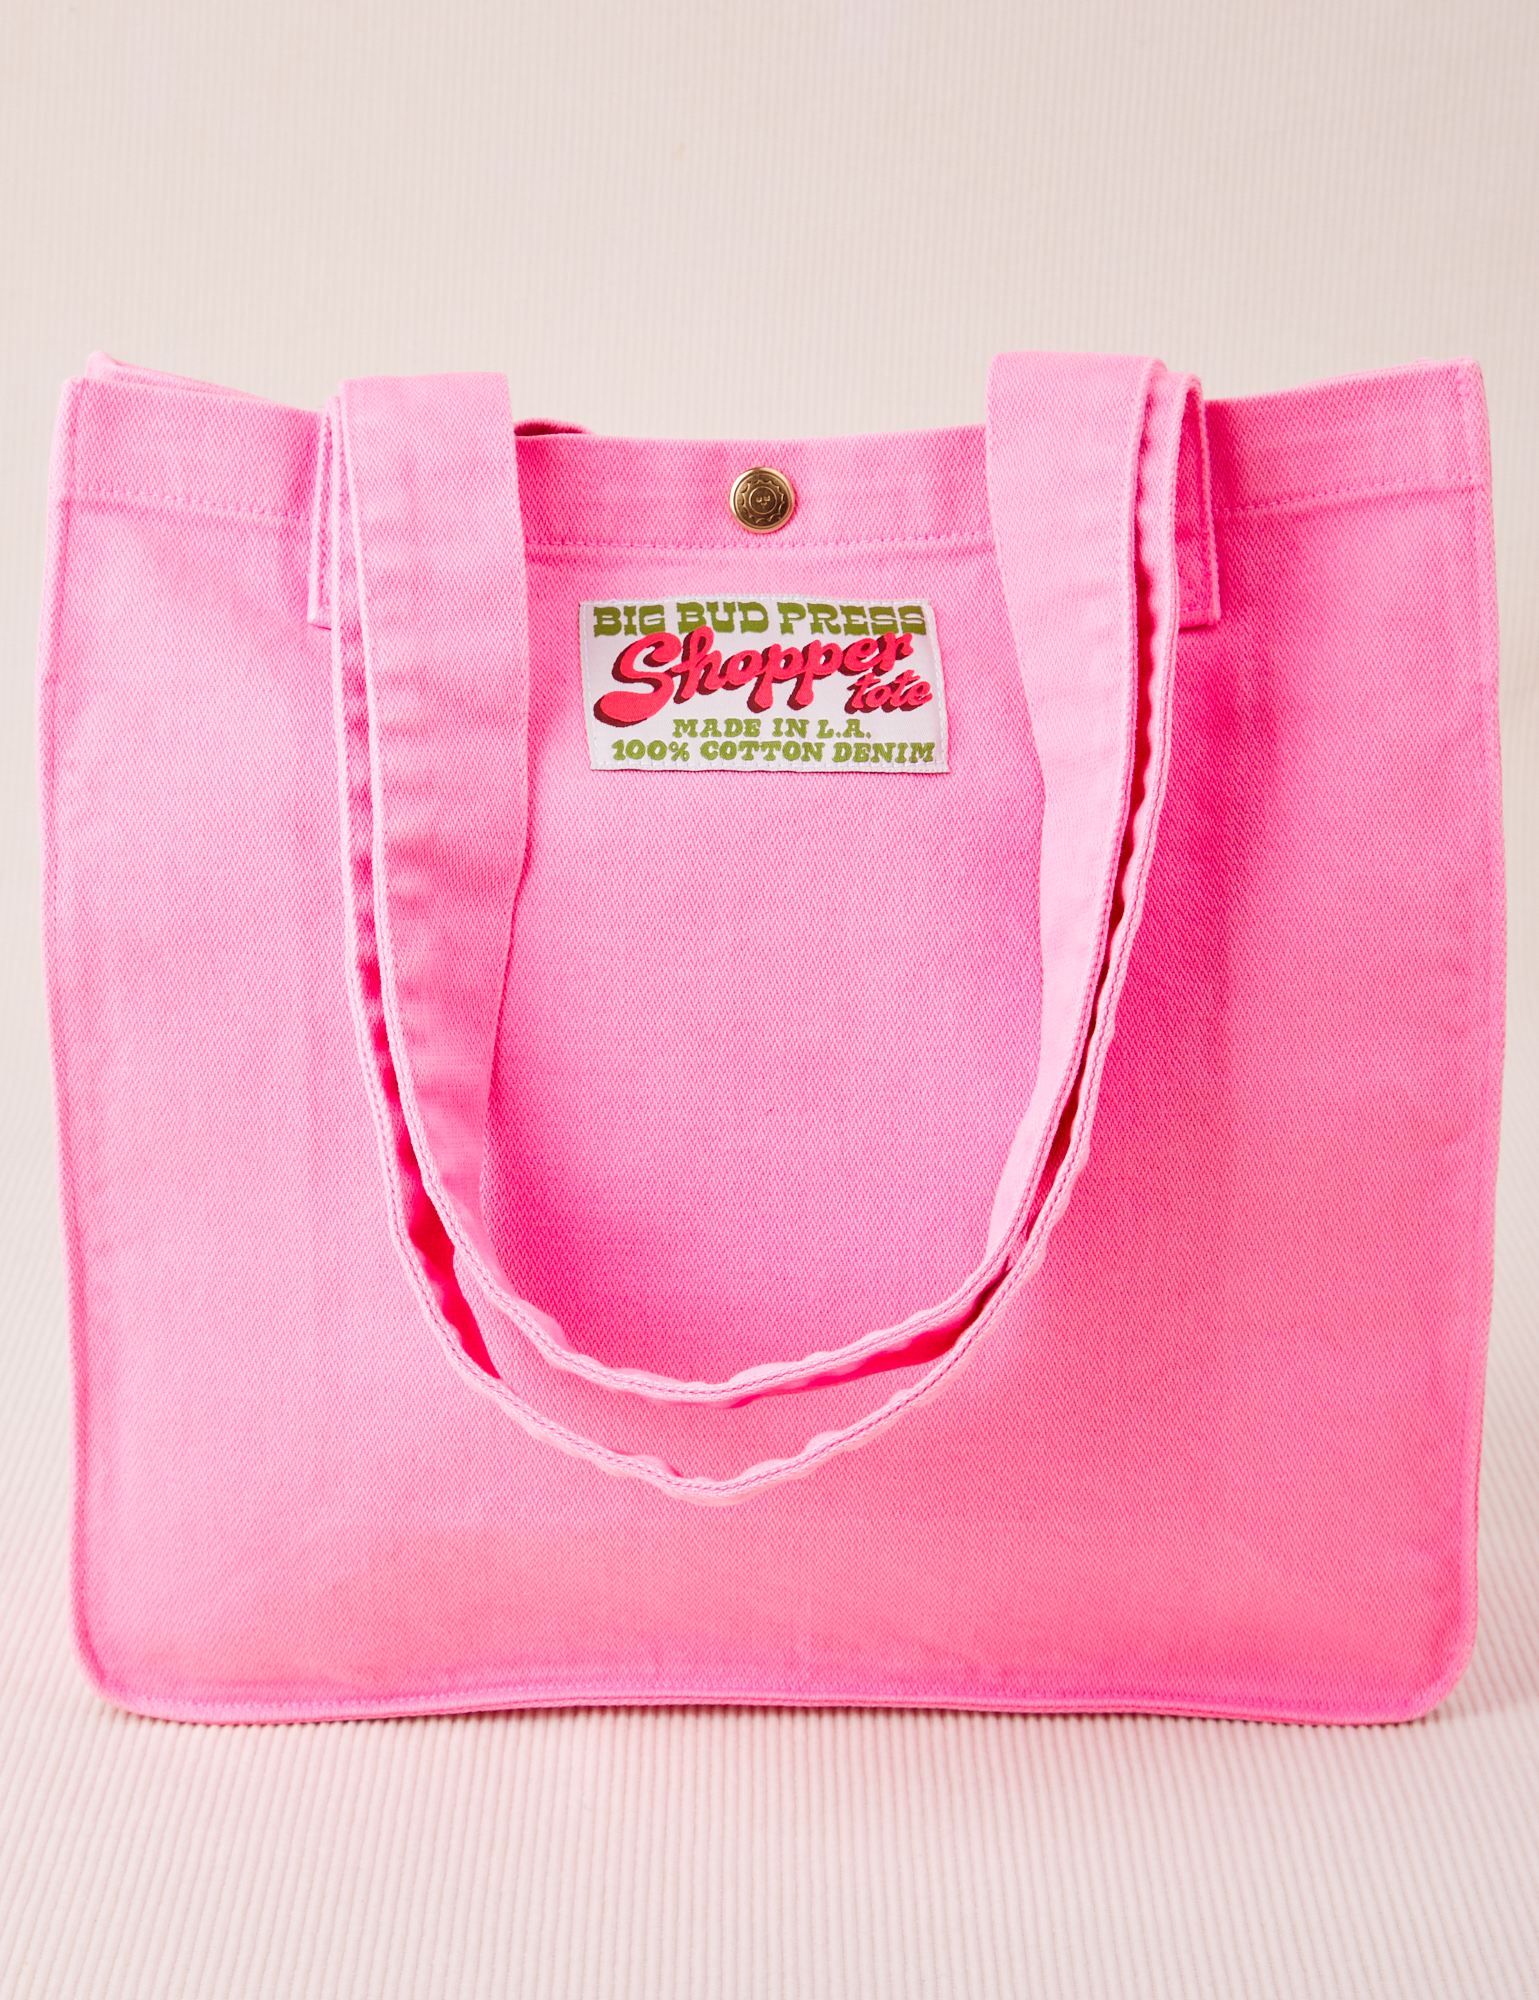 Shopper Tote Bag in Bubblegum pink with straps laying on front of bag